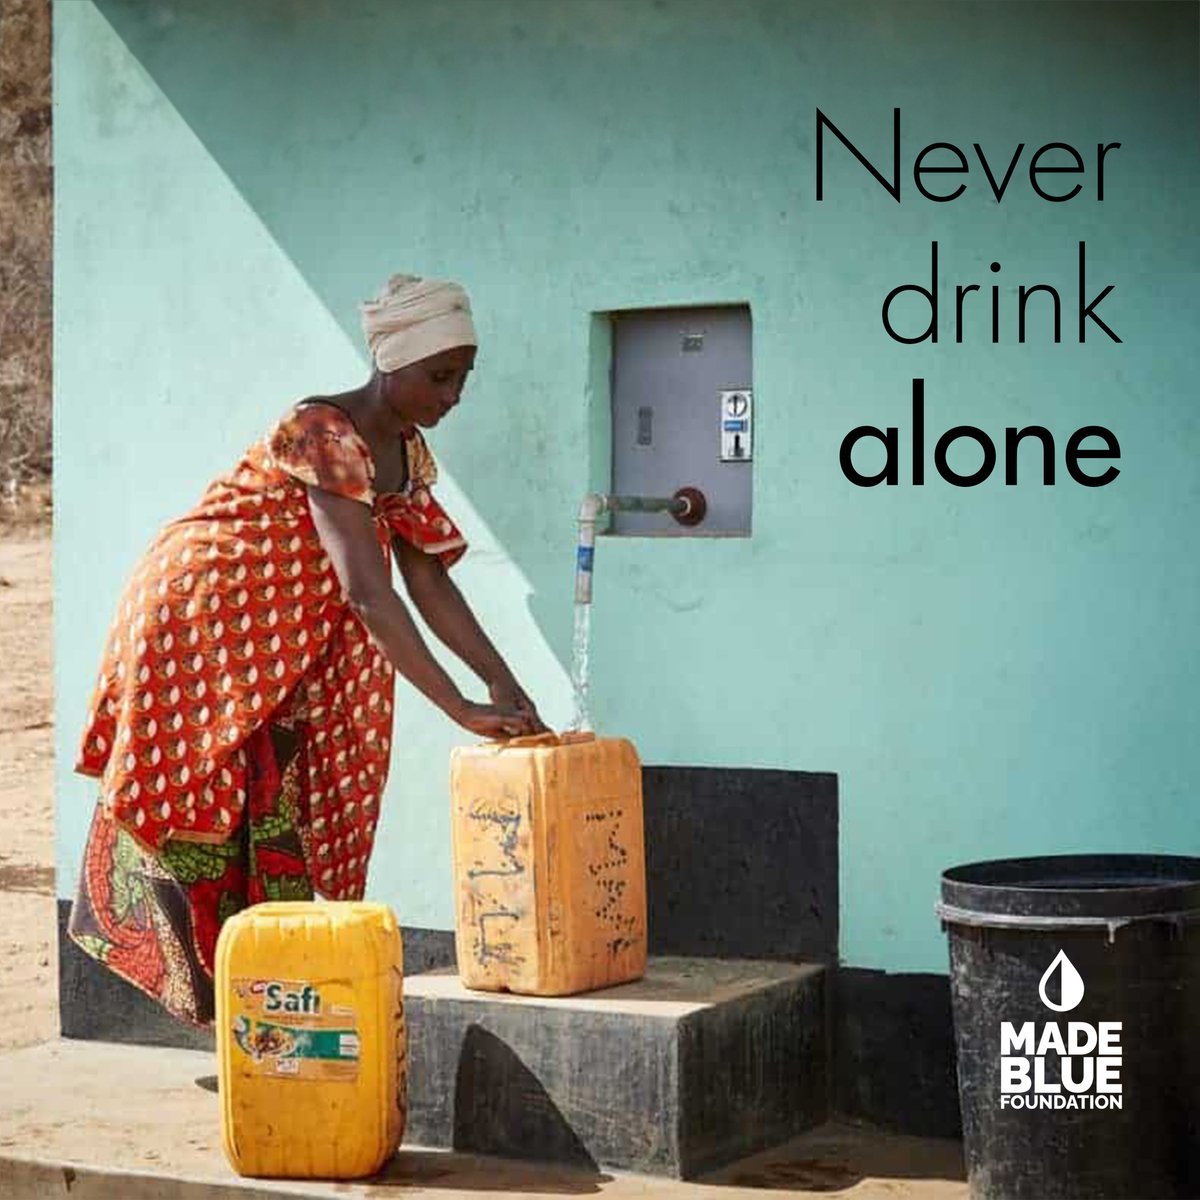 Access to clean water is a basic human right, yet 771 million people lack it. We are proud to have partnered with Made Blue to provide clean water to those in need. 💧 eu1.hubs.ly/H08q9cs0
#CleanWaterForAll #MadeBlue #WaterProjects